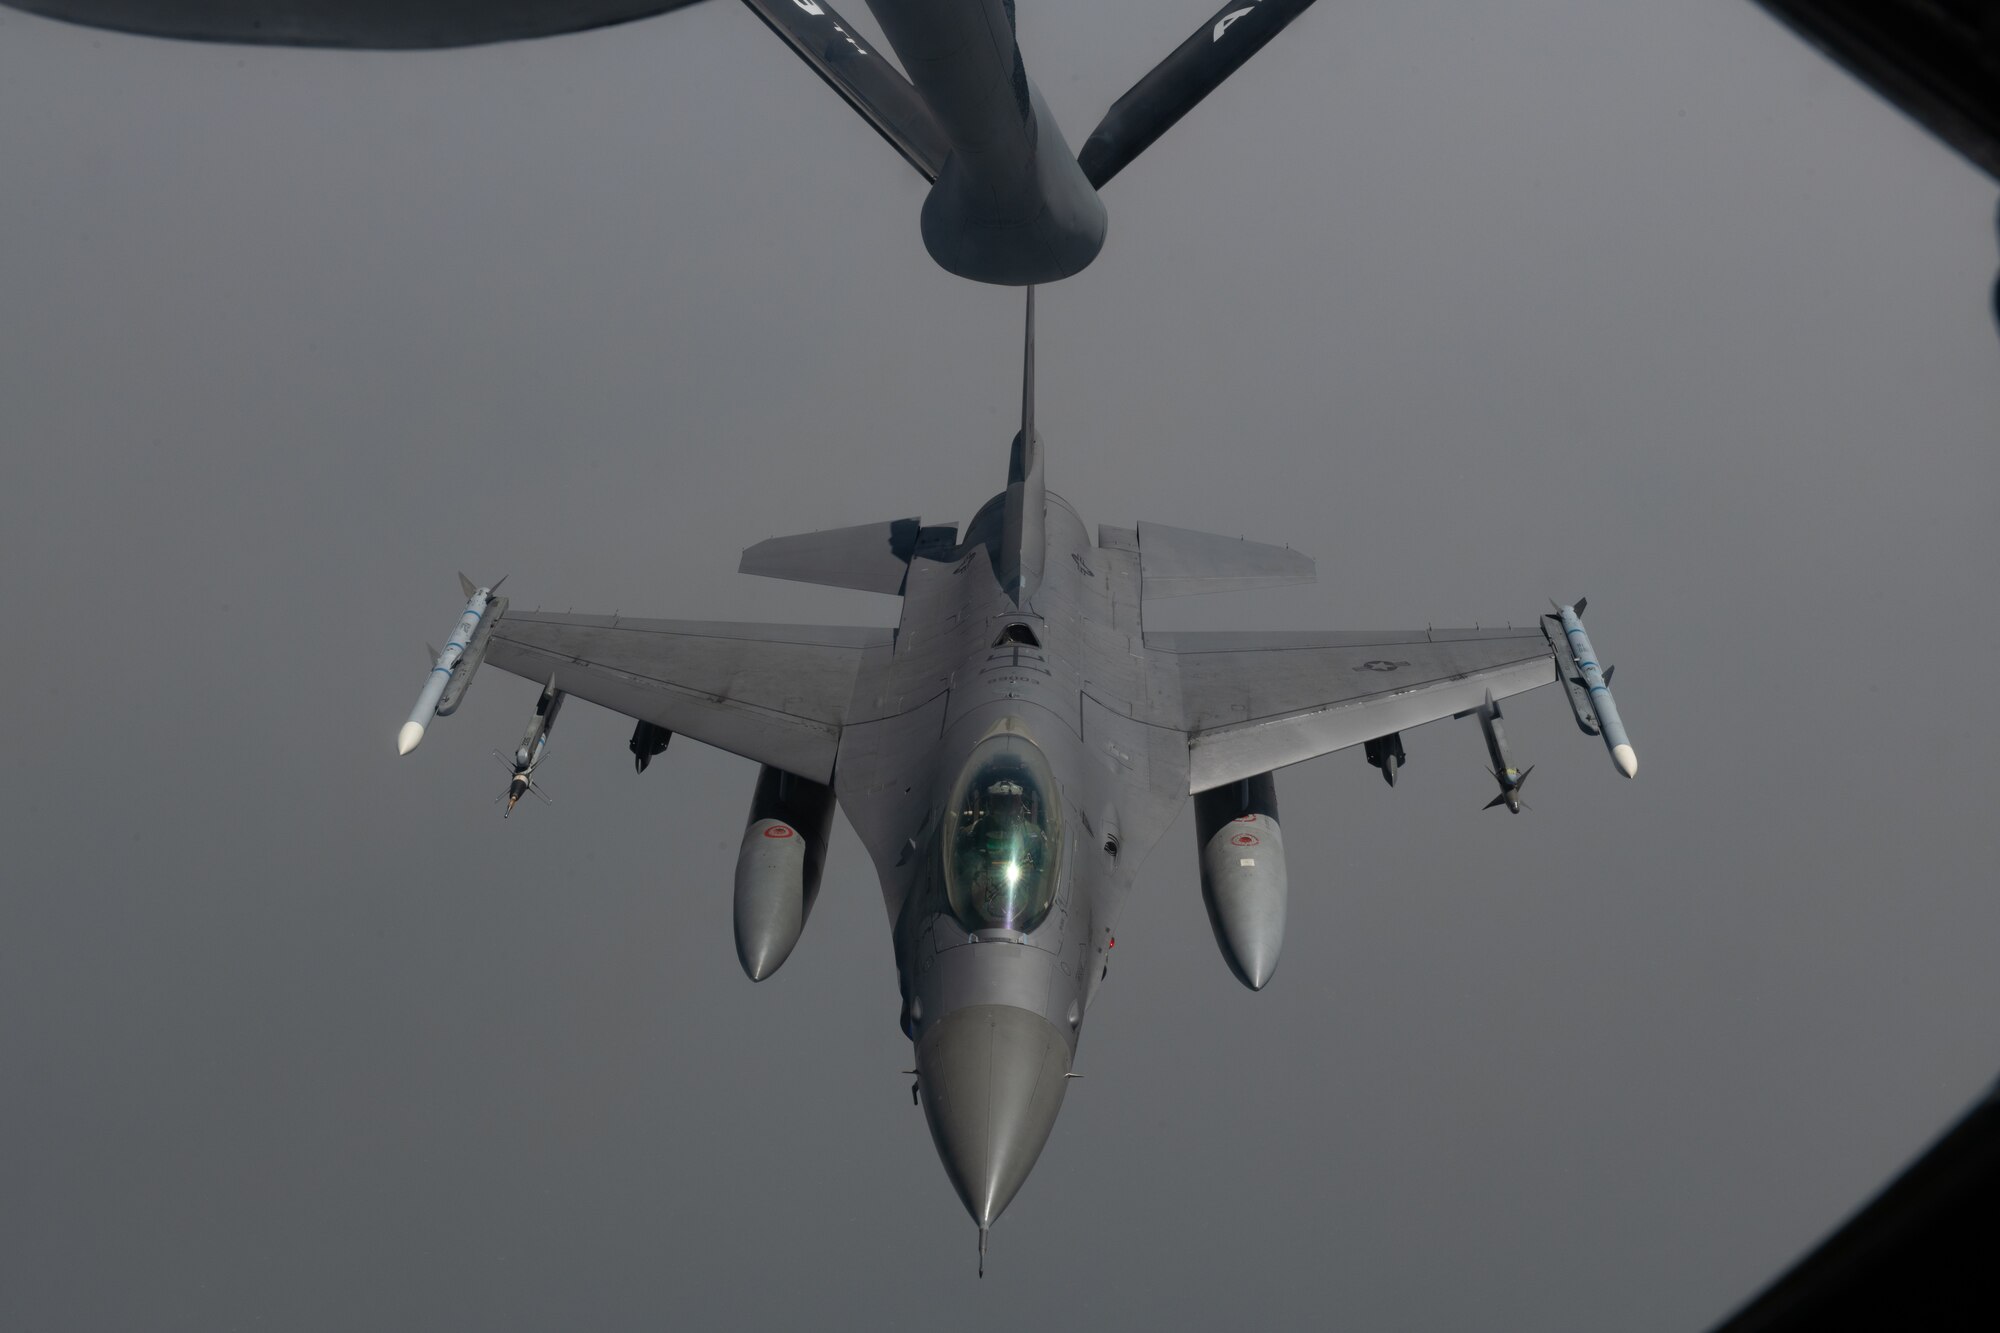 A U.S. Air Force F-16 Fighting Falcon prepares to receive fuel from a U.S. Air Force KC-135 Stratotanker during Korea Flight Training Apr. 21, 2023. The exercise was part of a routine training schedule designed to enhance integration of combined and joint airpower execution through face-to-face planning, briefing, and debriefing; and to train mission commanders and aircrew to operate and succeed in scenarios with a robust surface-to-air and air-to-air threats. (U.S. Air Force photo by Senior Airman Cedrique Oldaker)